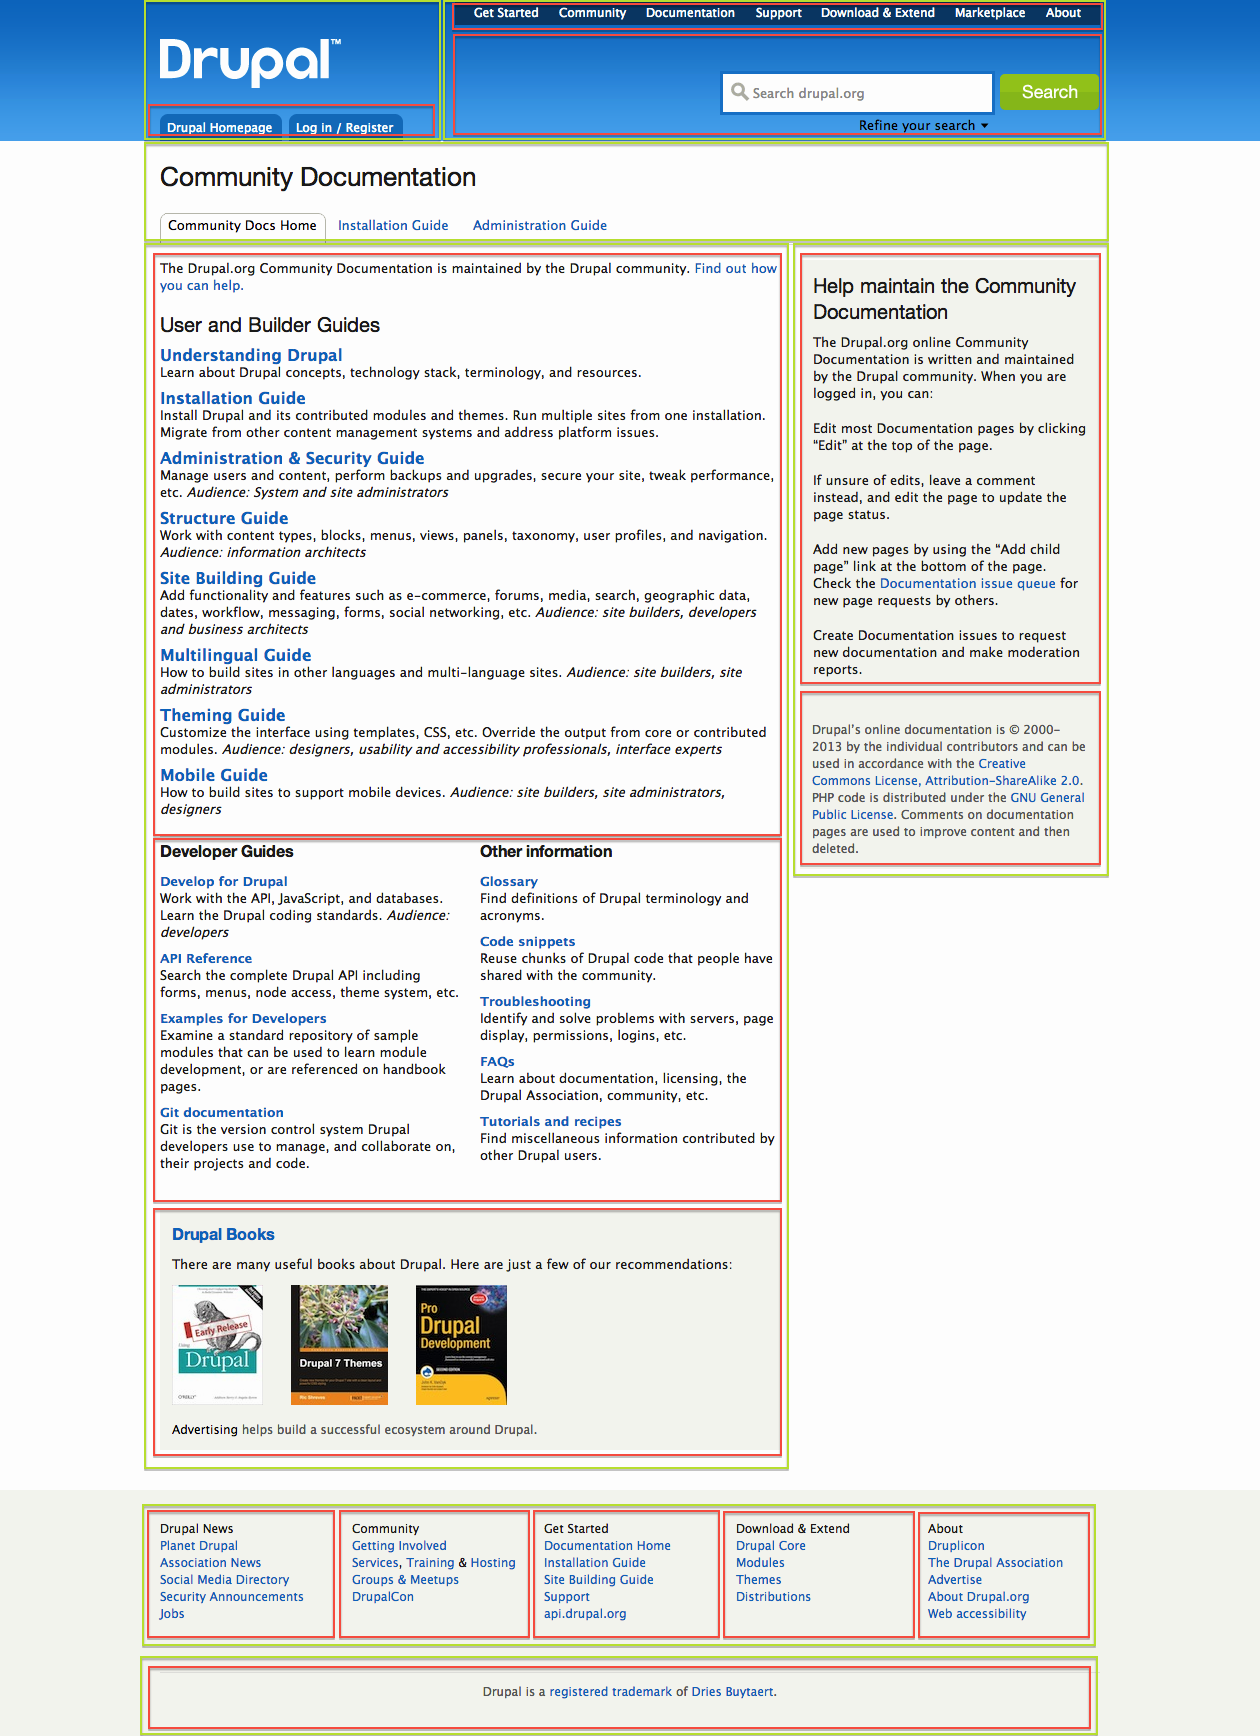 A screenshot of a page on the Drupal website highlighting regions and blocks